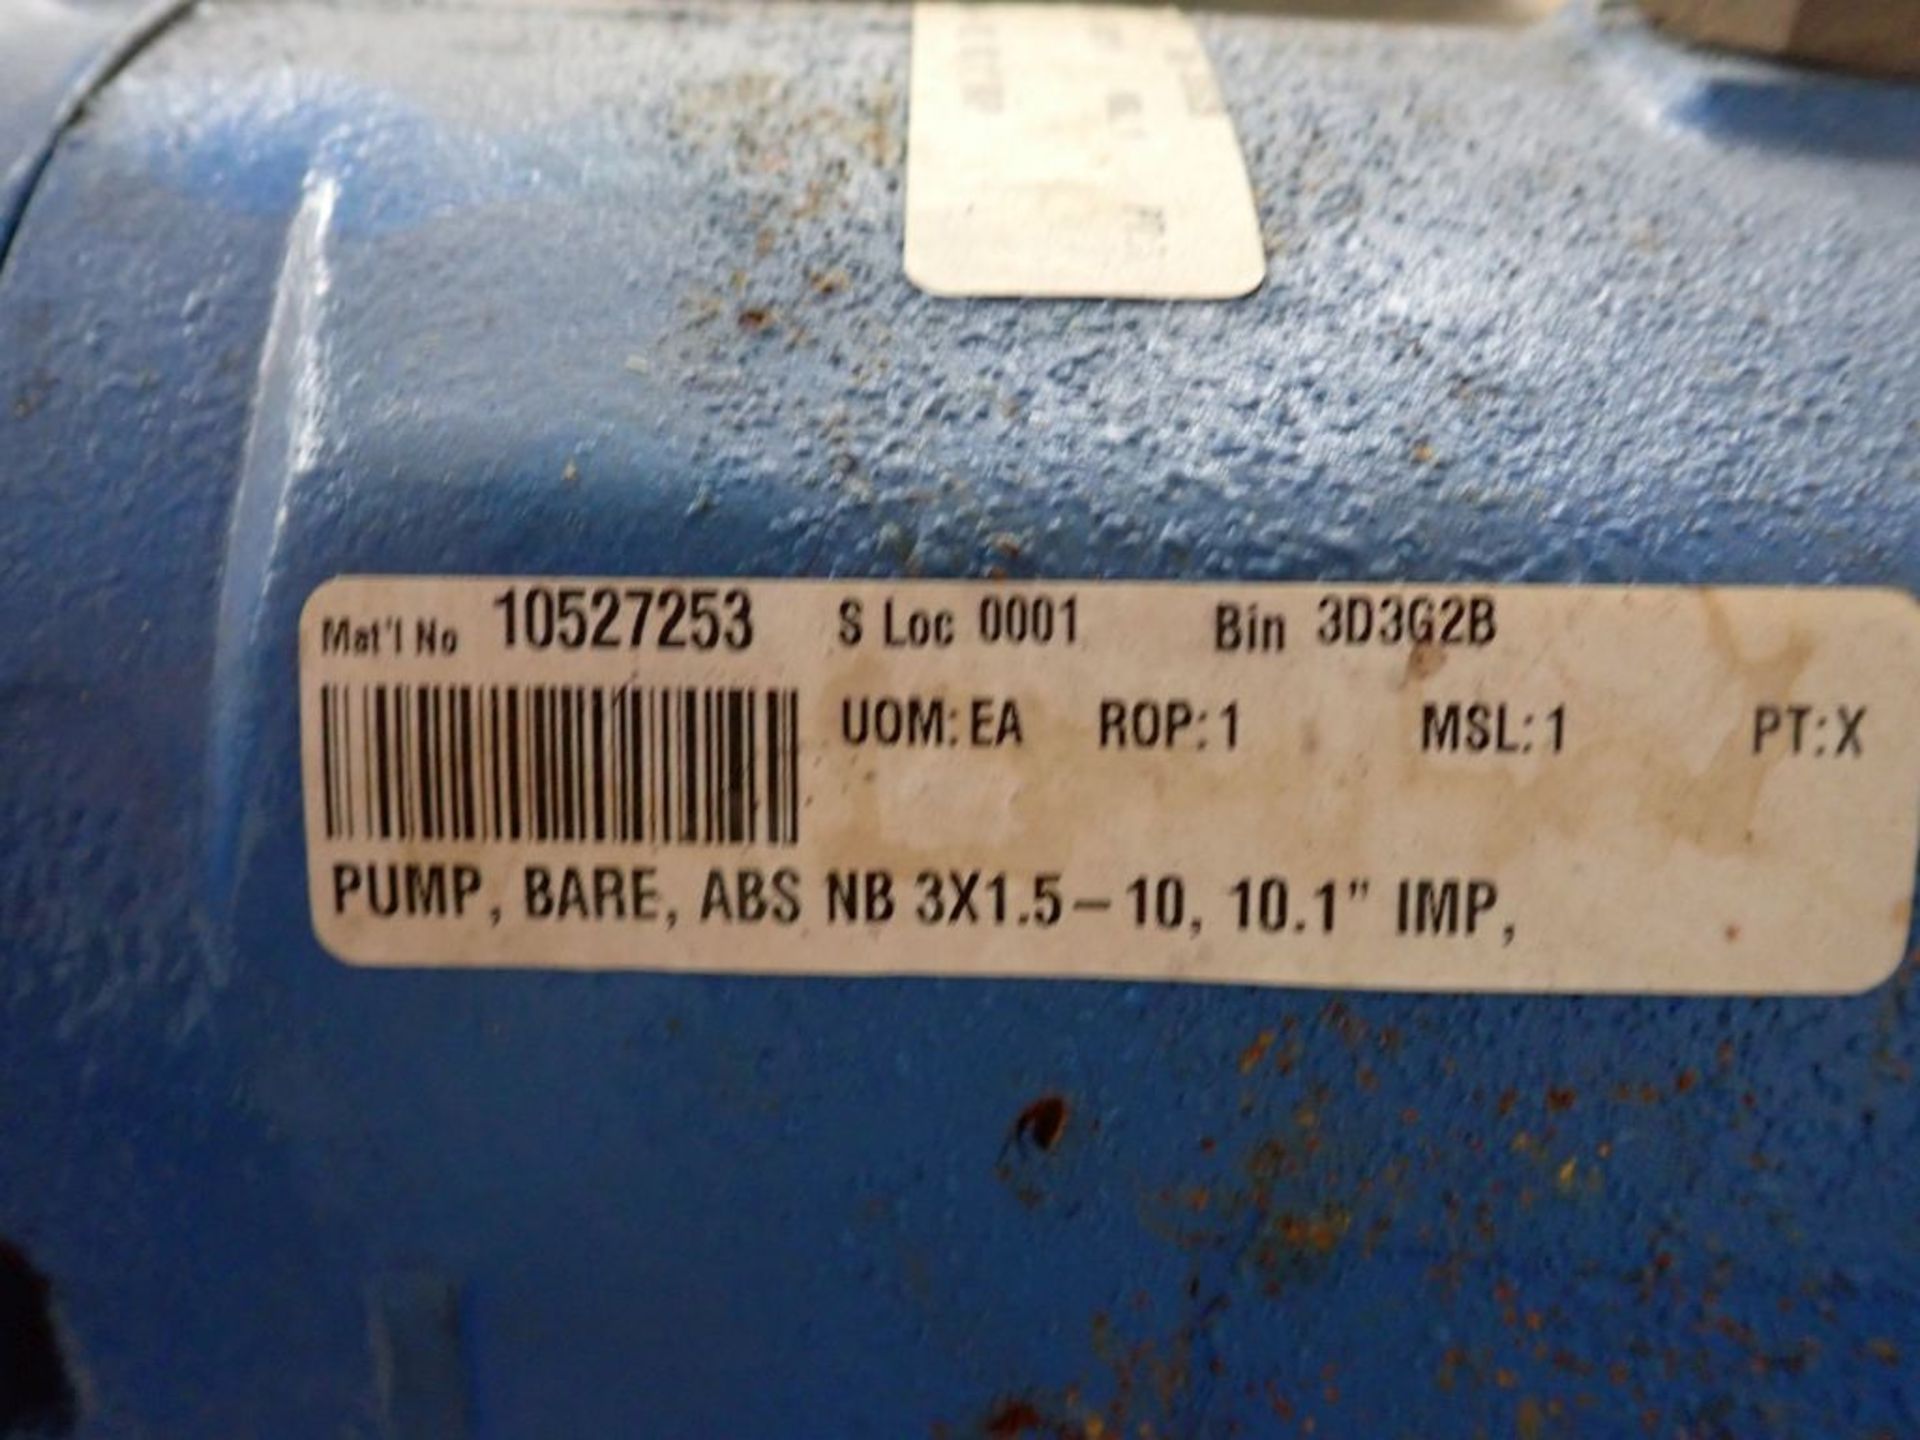 Pump - Bare ABS NB 3 x 1.5-10; 10.1" IMP; Tag: 215682 - Image 4 of 9